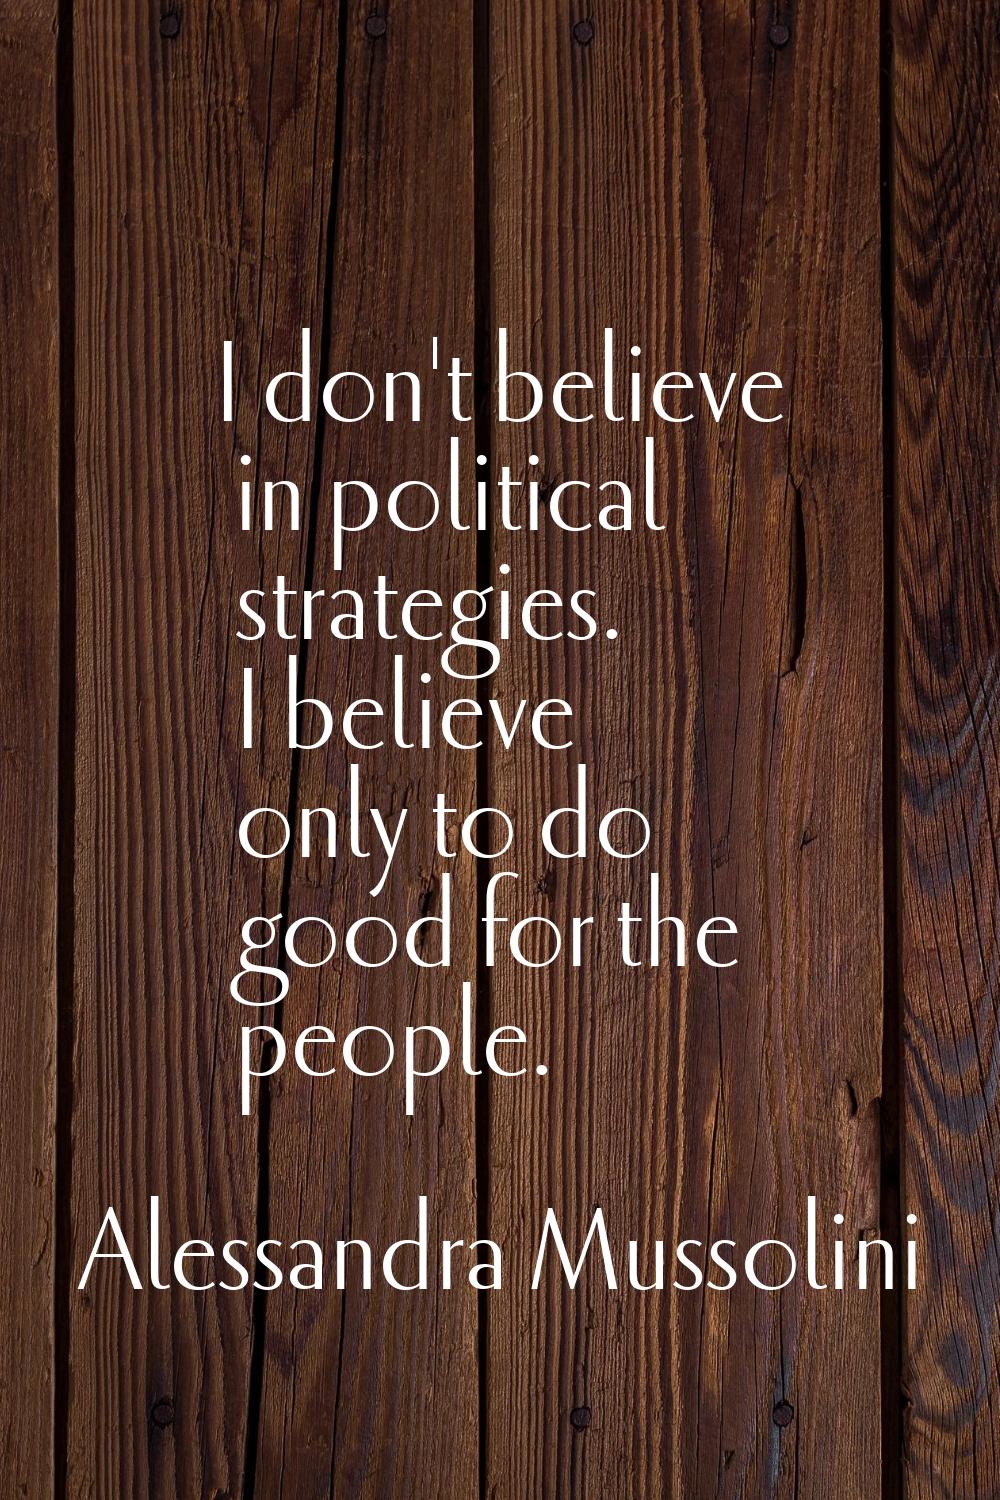 I don't believe in political strategies. I believe only to do good for the people.